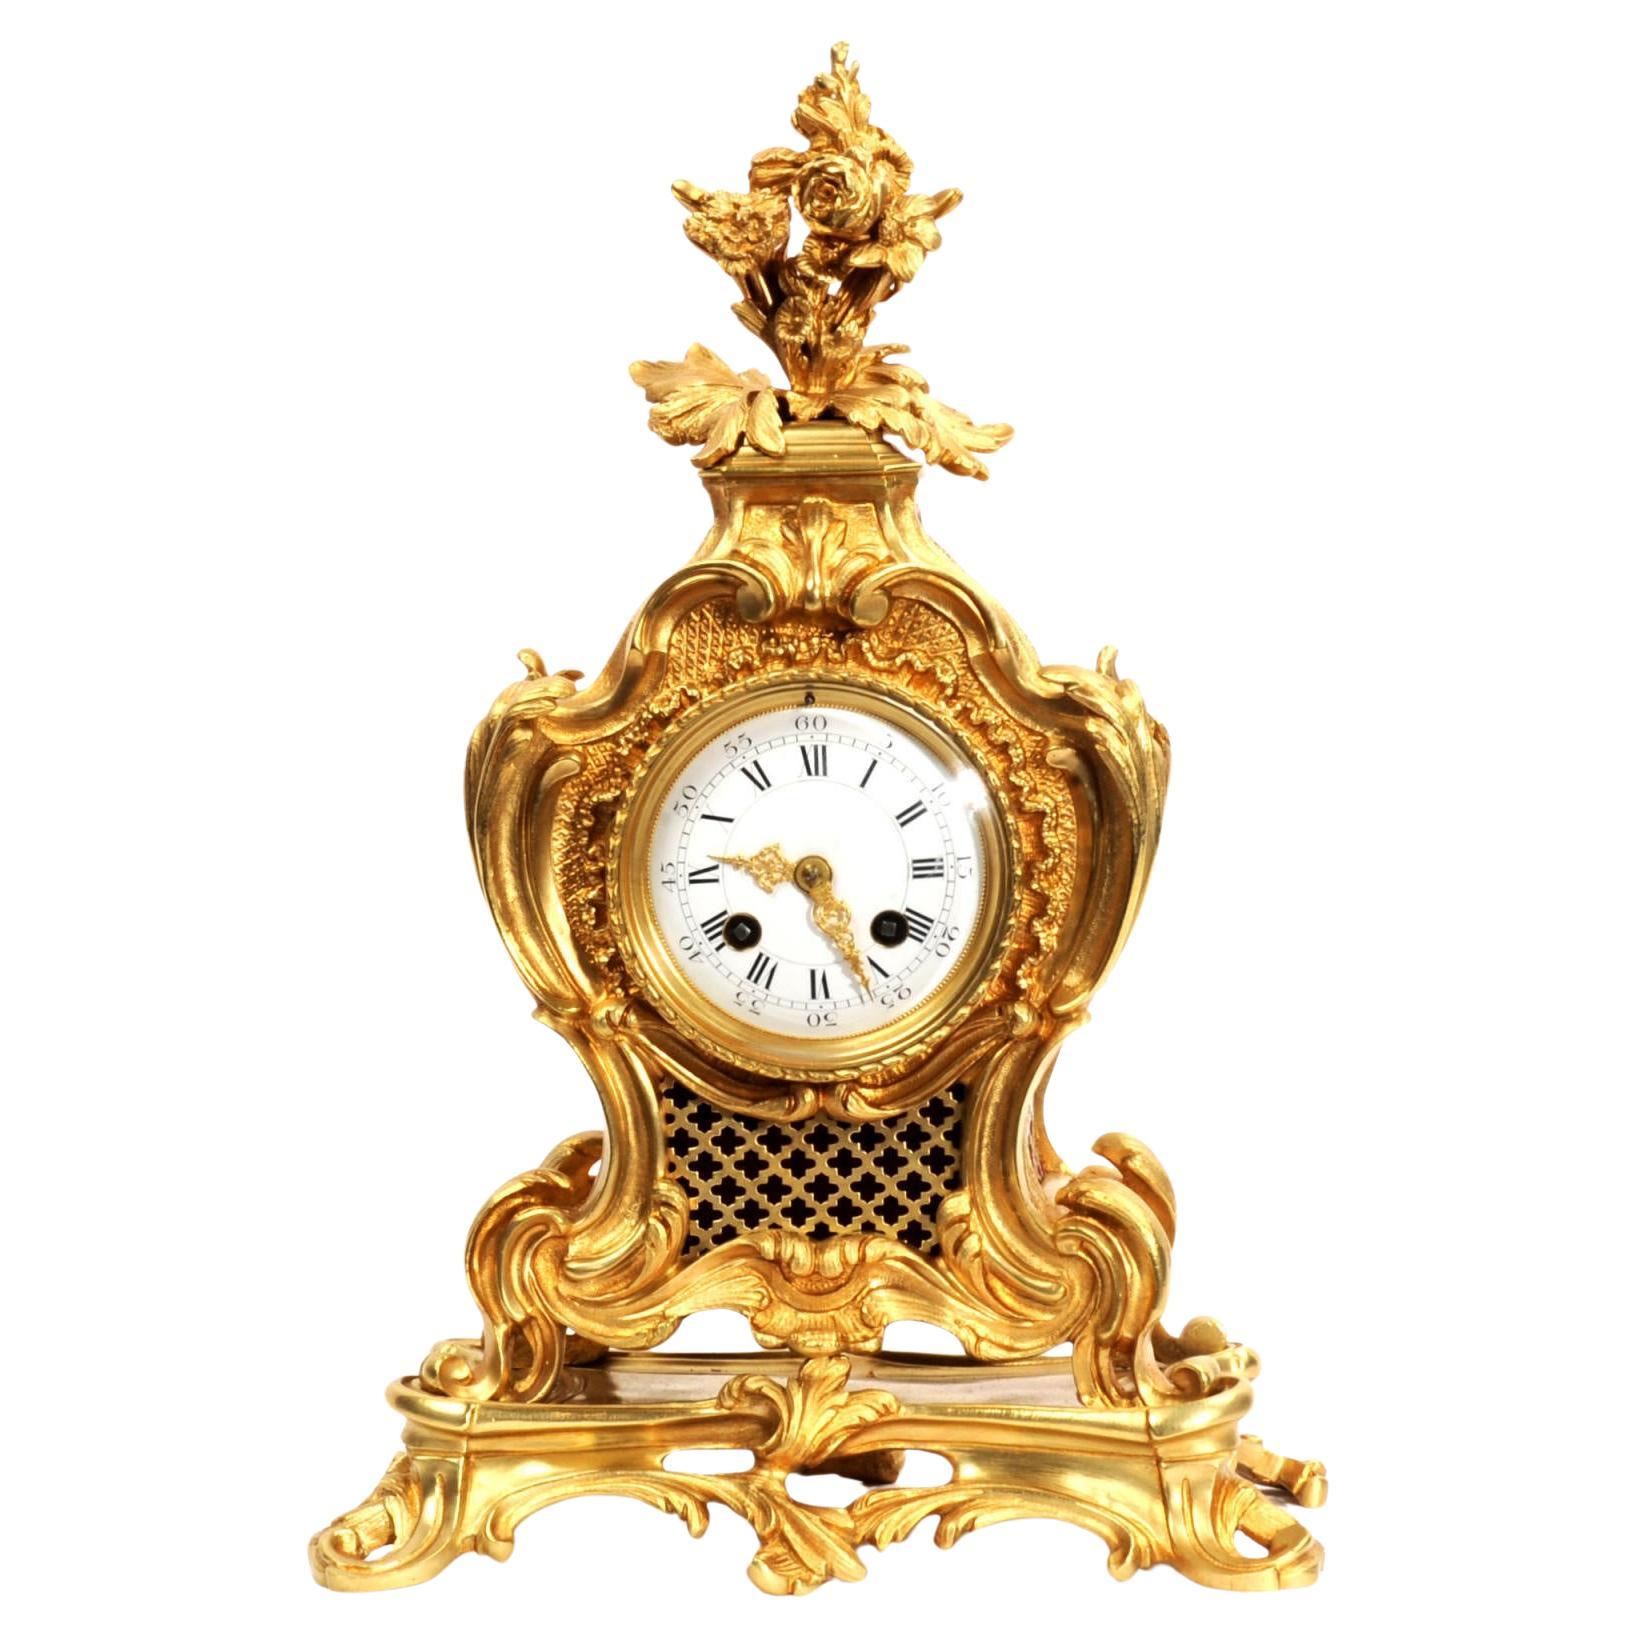 Japy Freres Antique French Ormolu Rococo Clock For Sale